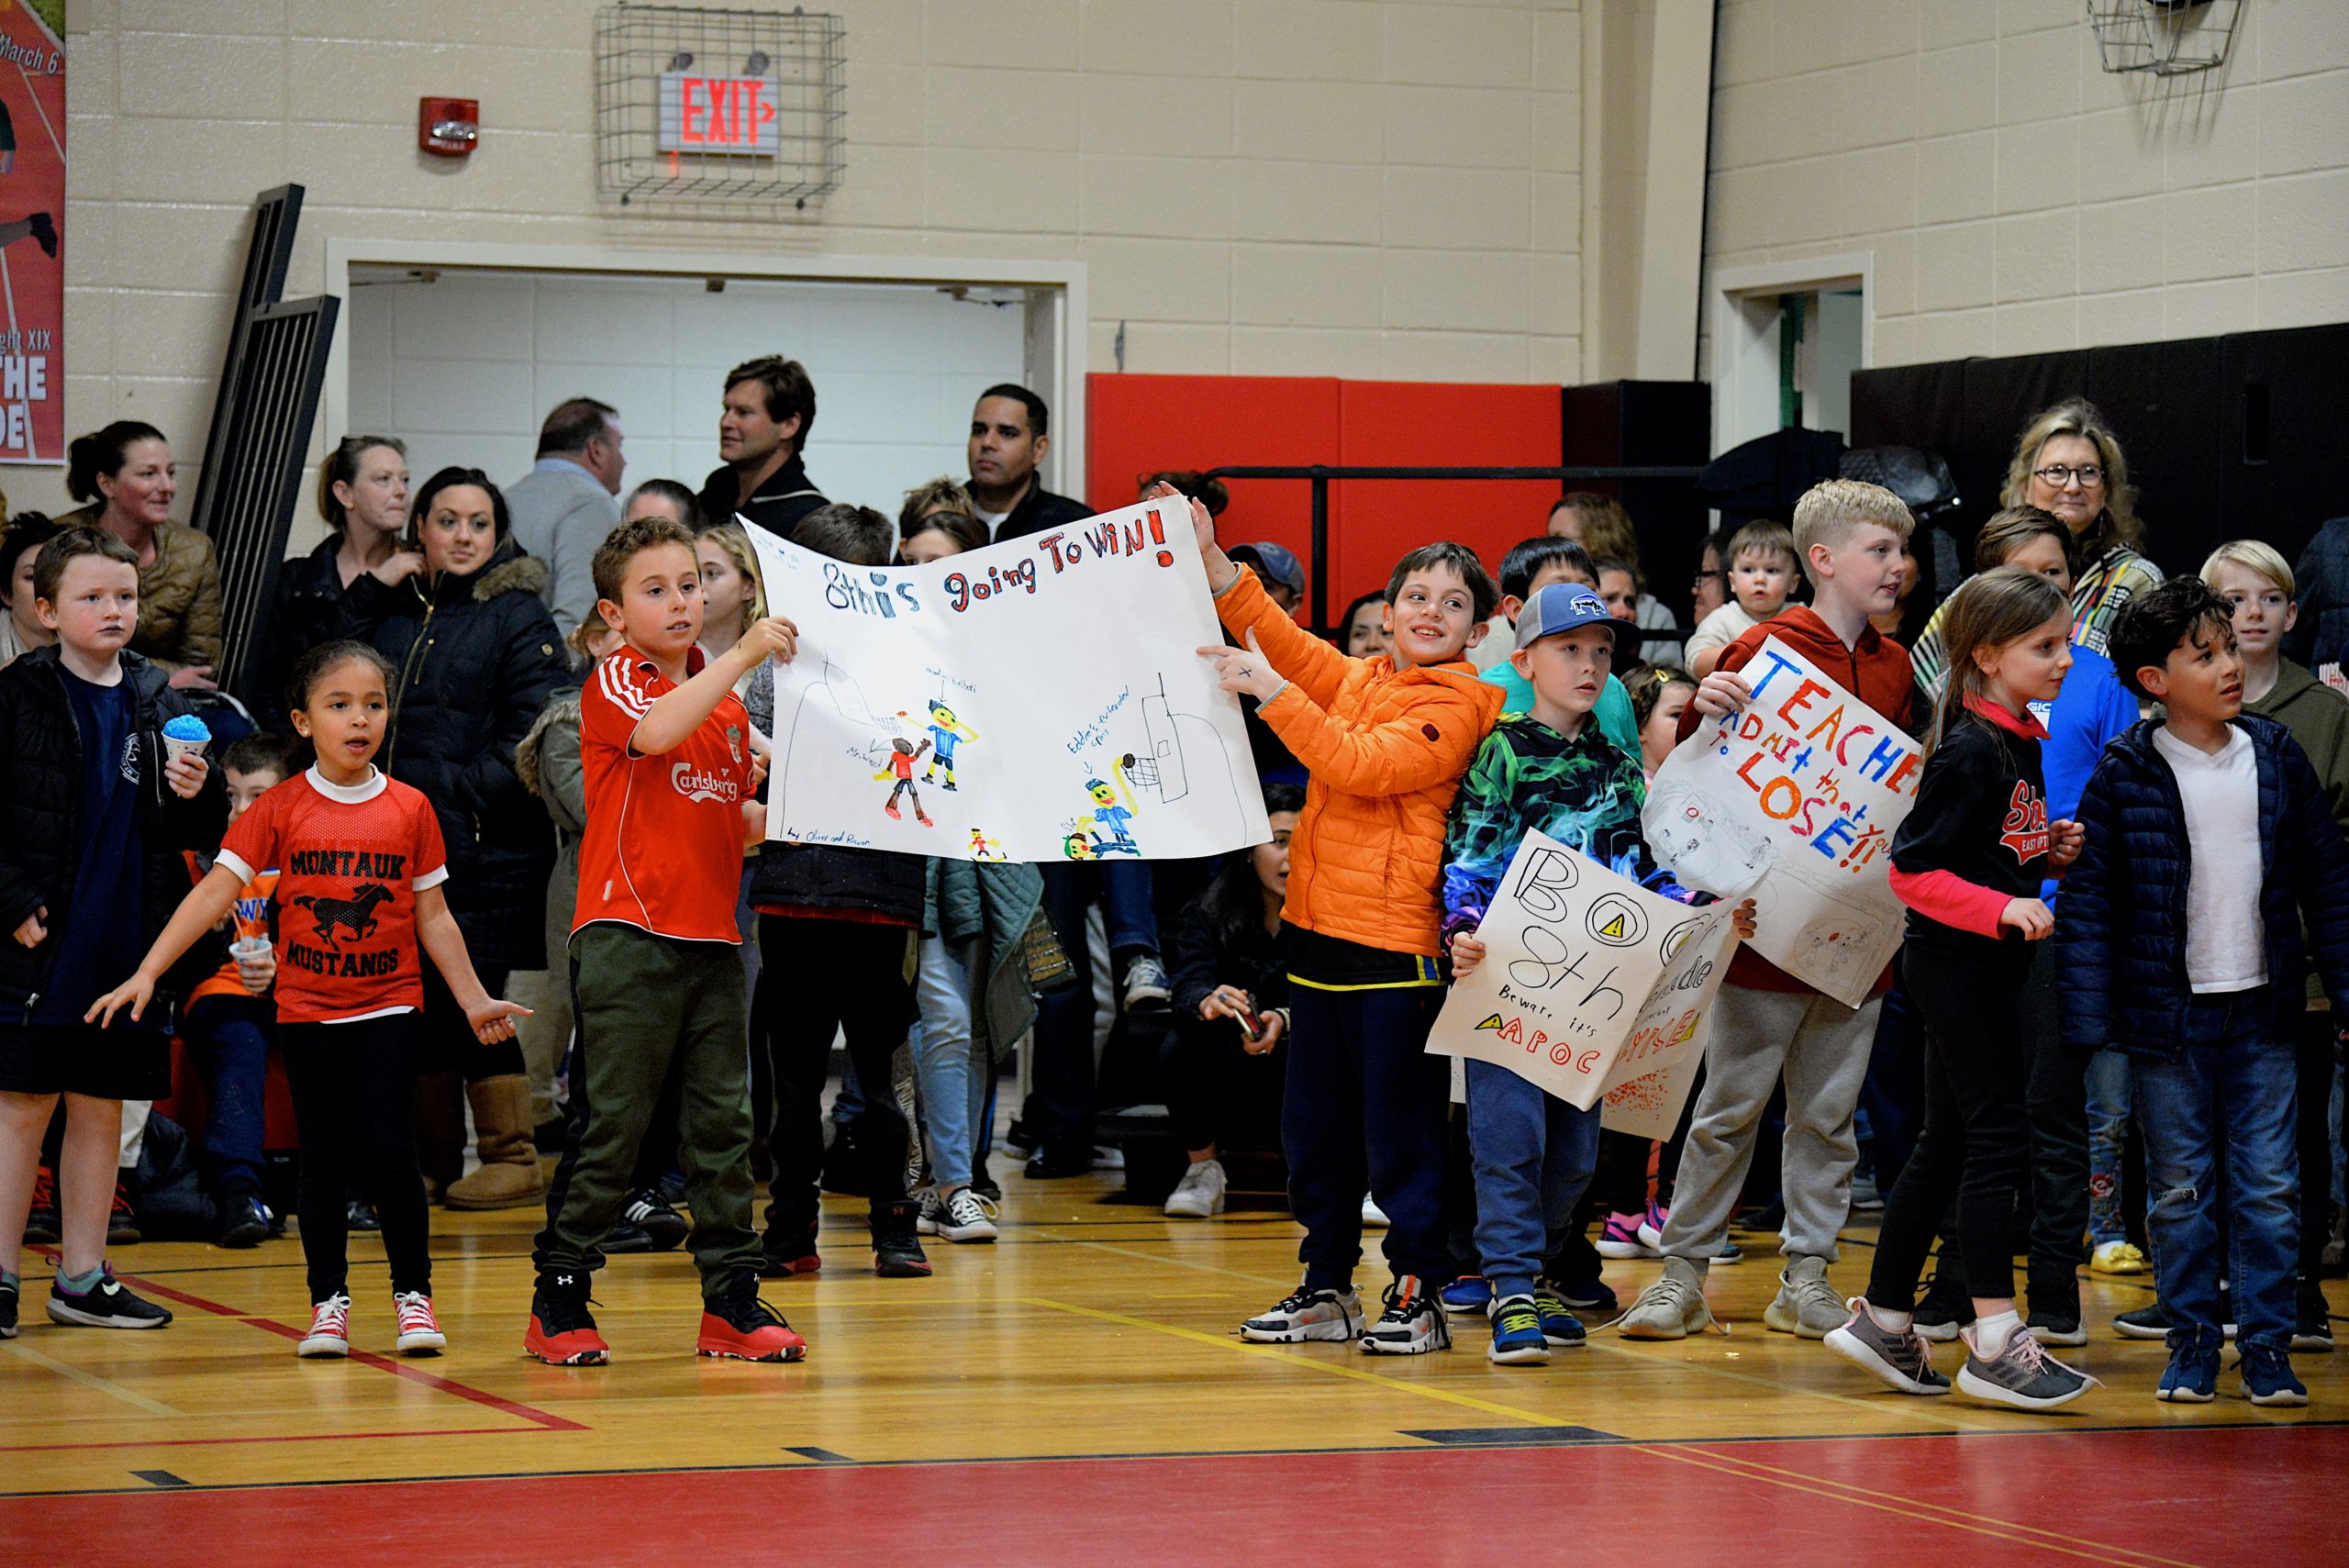 Montauk School held its Sports Night on Friday, during which teachers and eighth grade students competed in a variety of contests before a packed house of cheering students and parents. KYRIL BROMLEY 